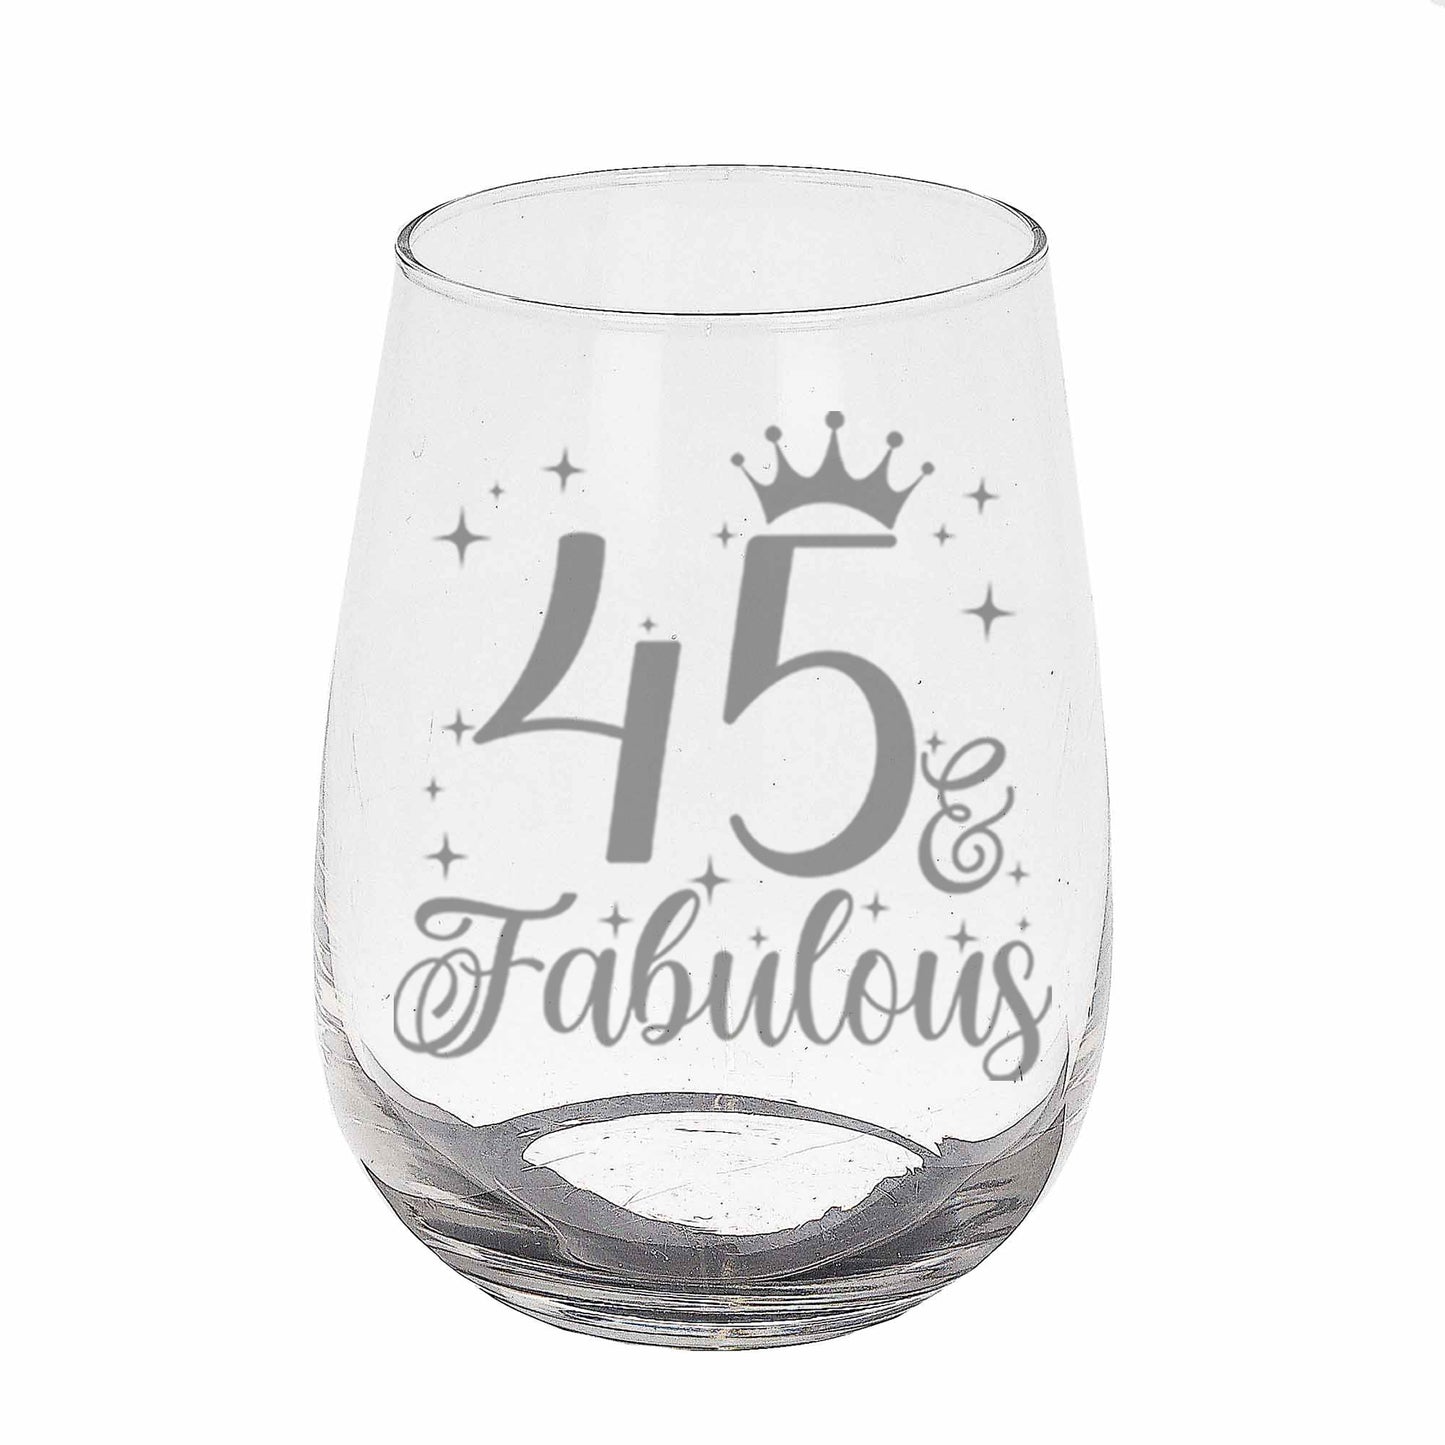 45 & Fabulous Engraved Stemless Gin Glass and/or Coaster Set  - Always Looking Good - Stemless Gin Glass On Its Own  